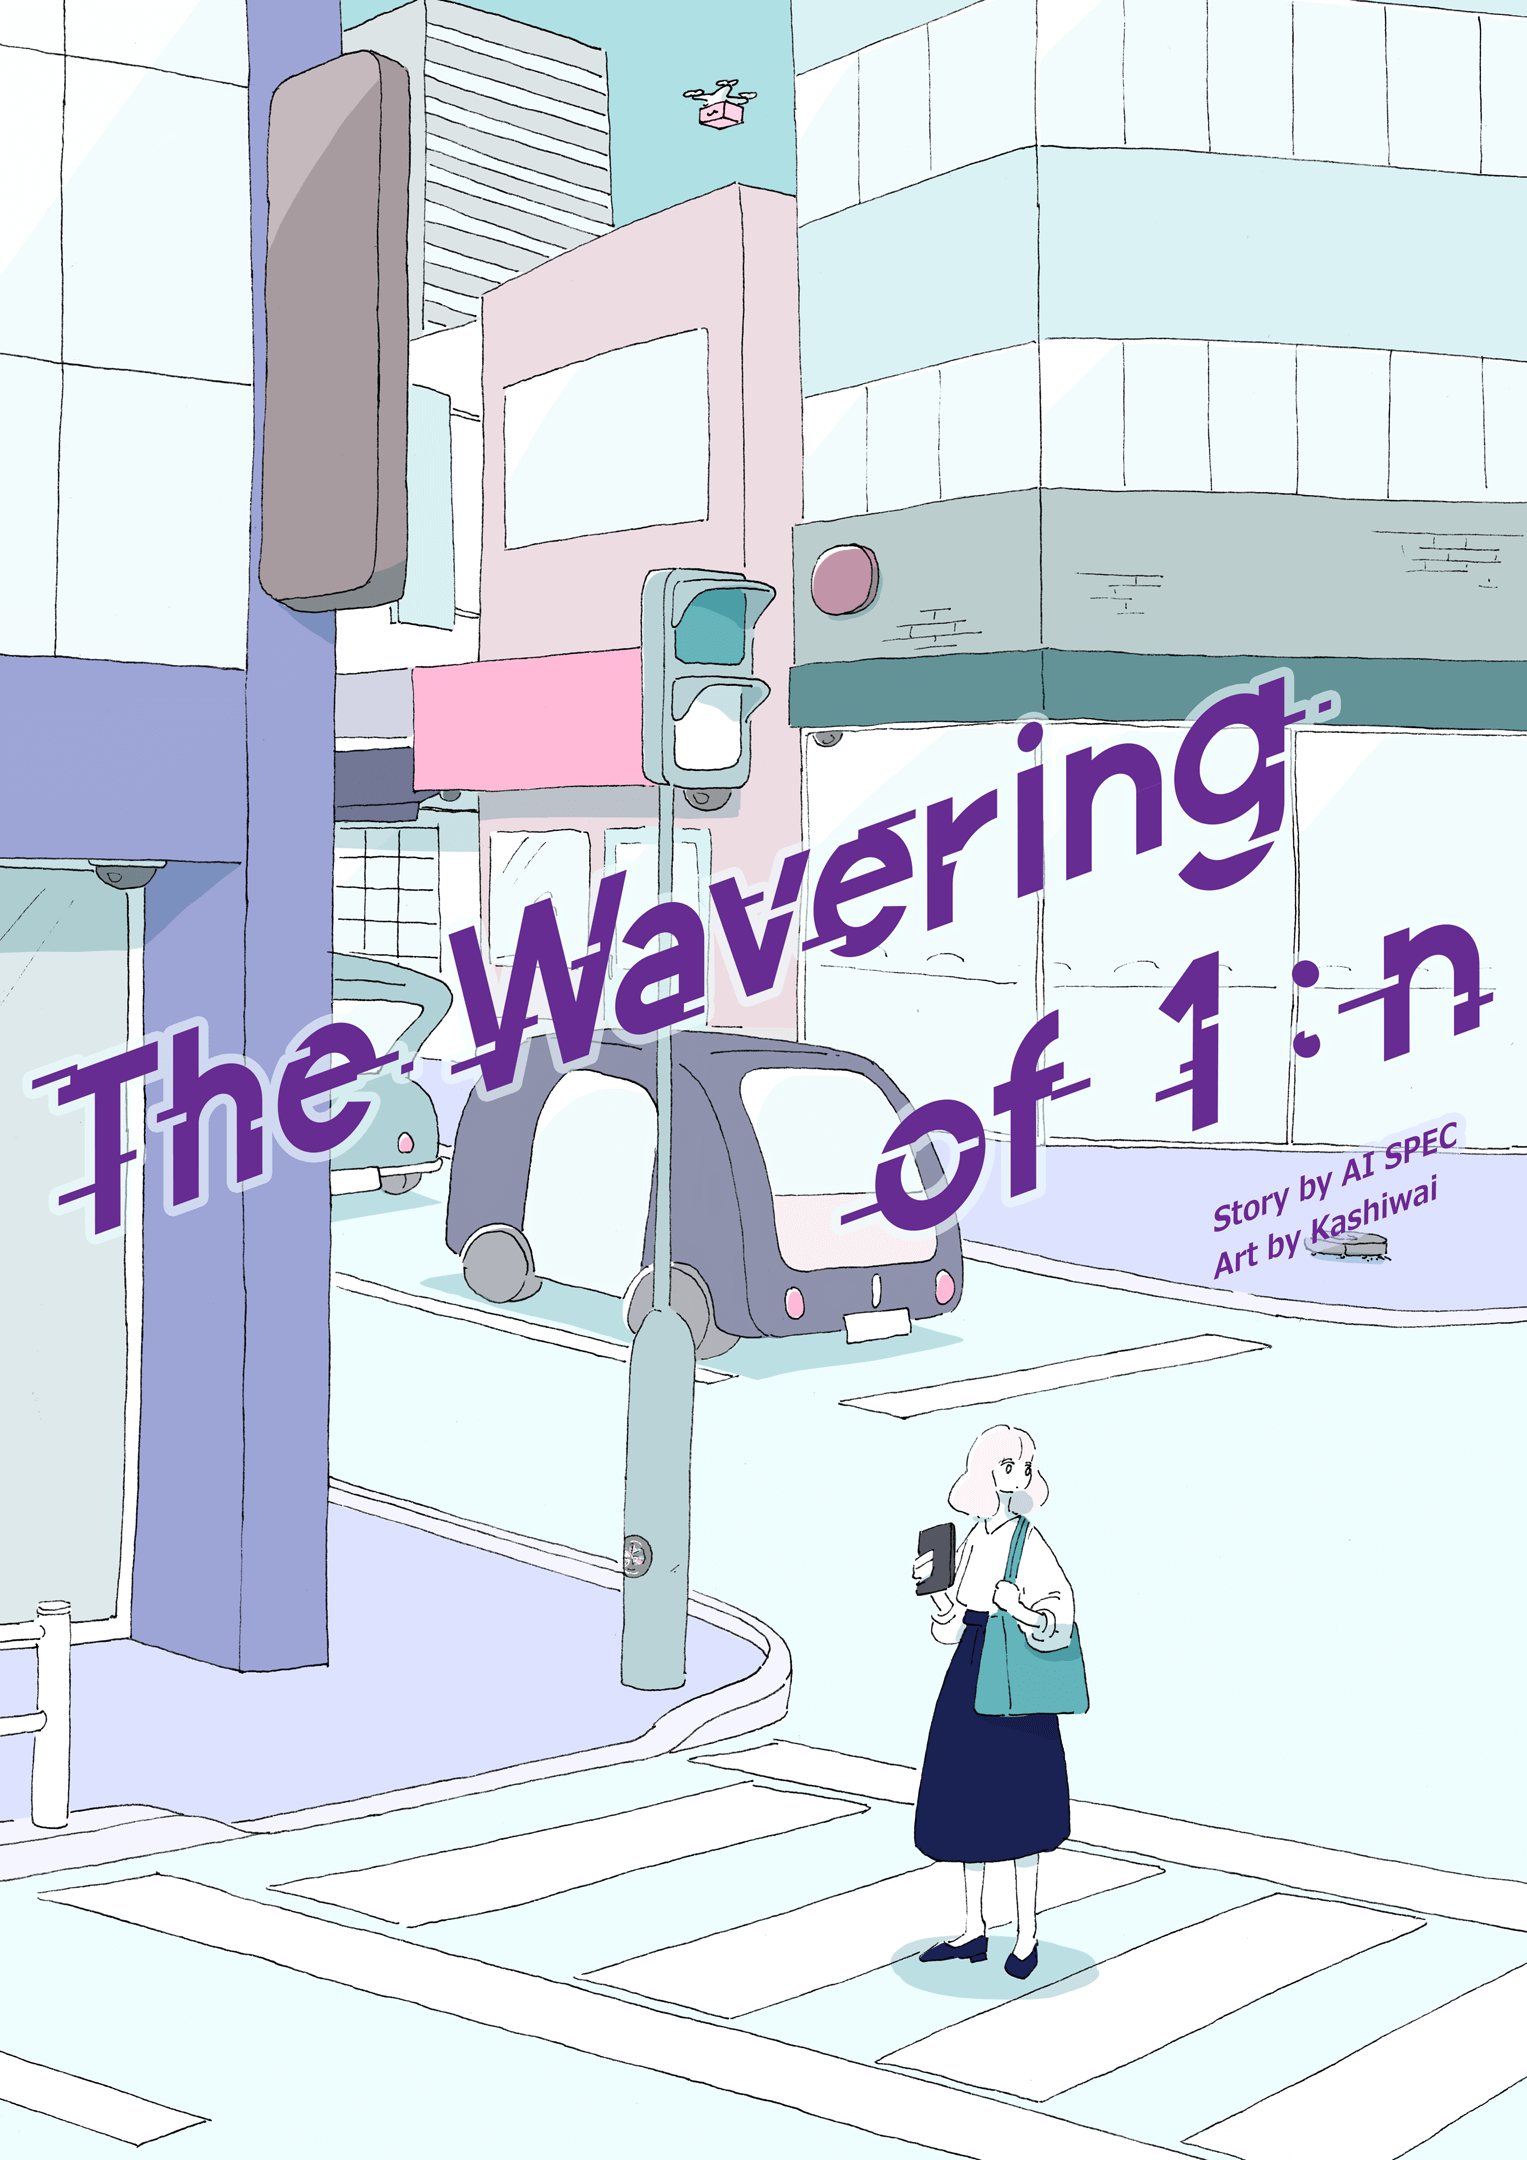 AI SPEC - The Wavering of 1:n